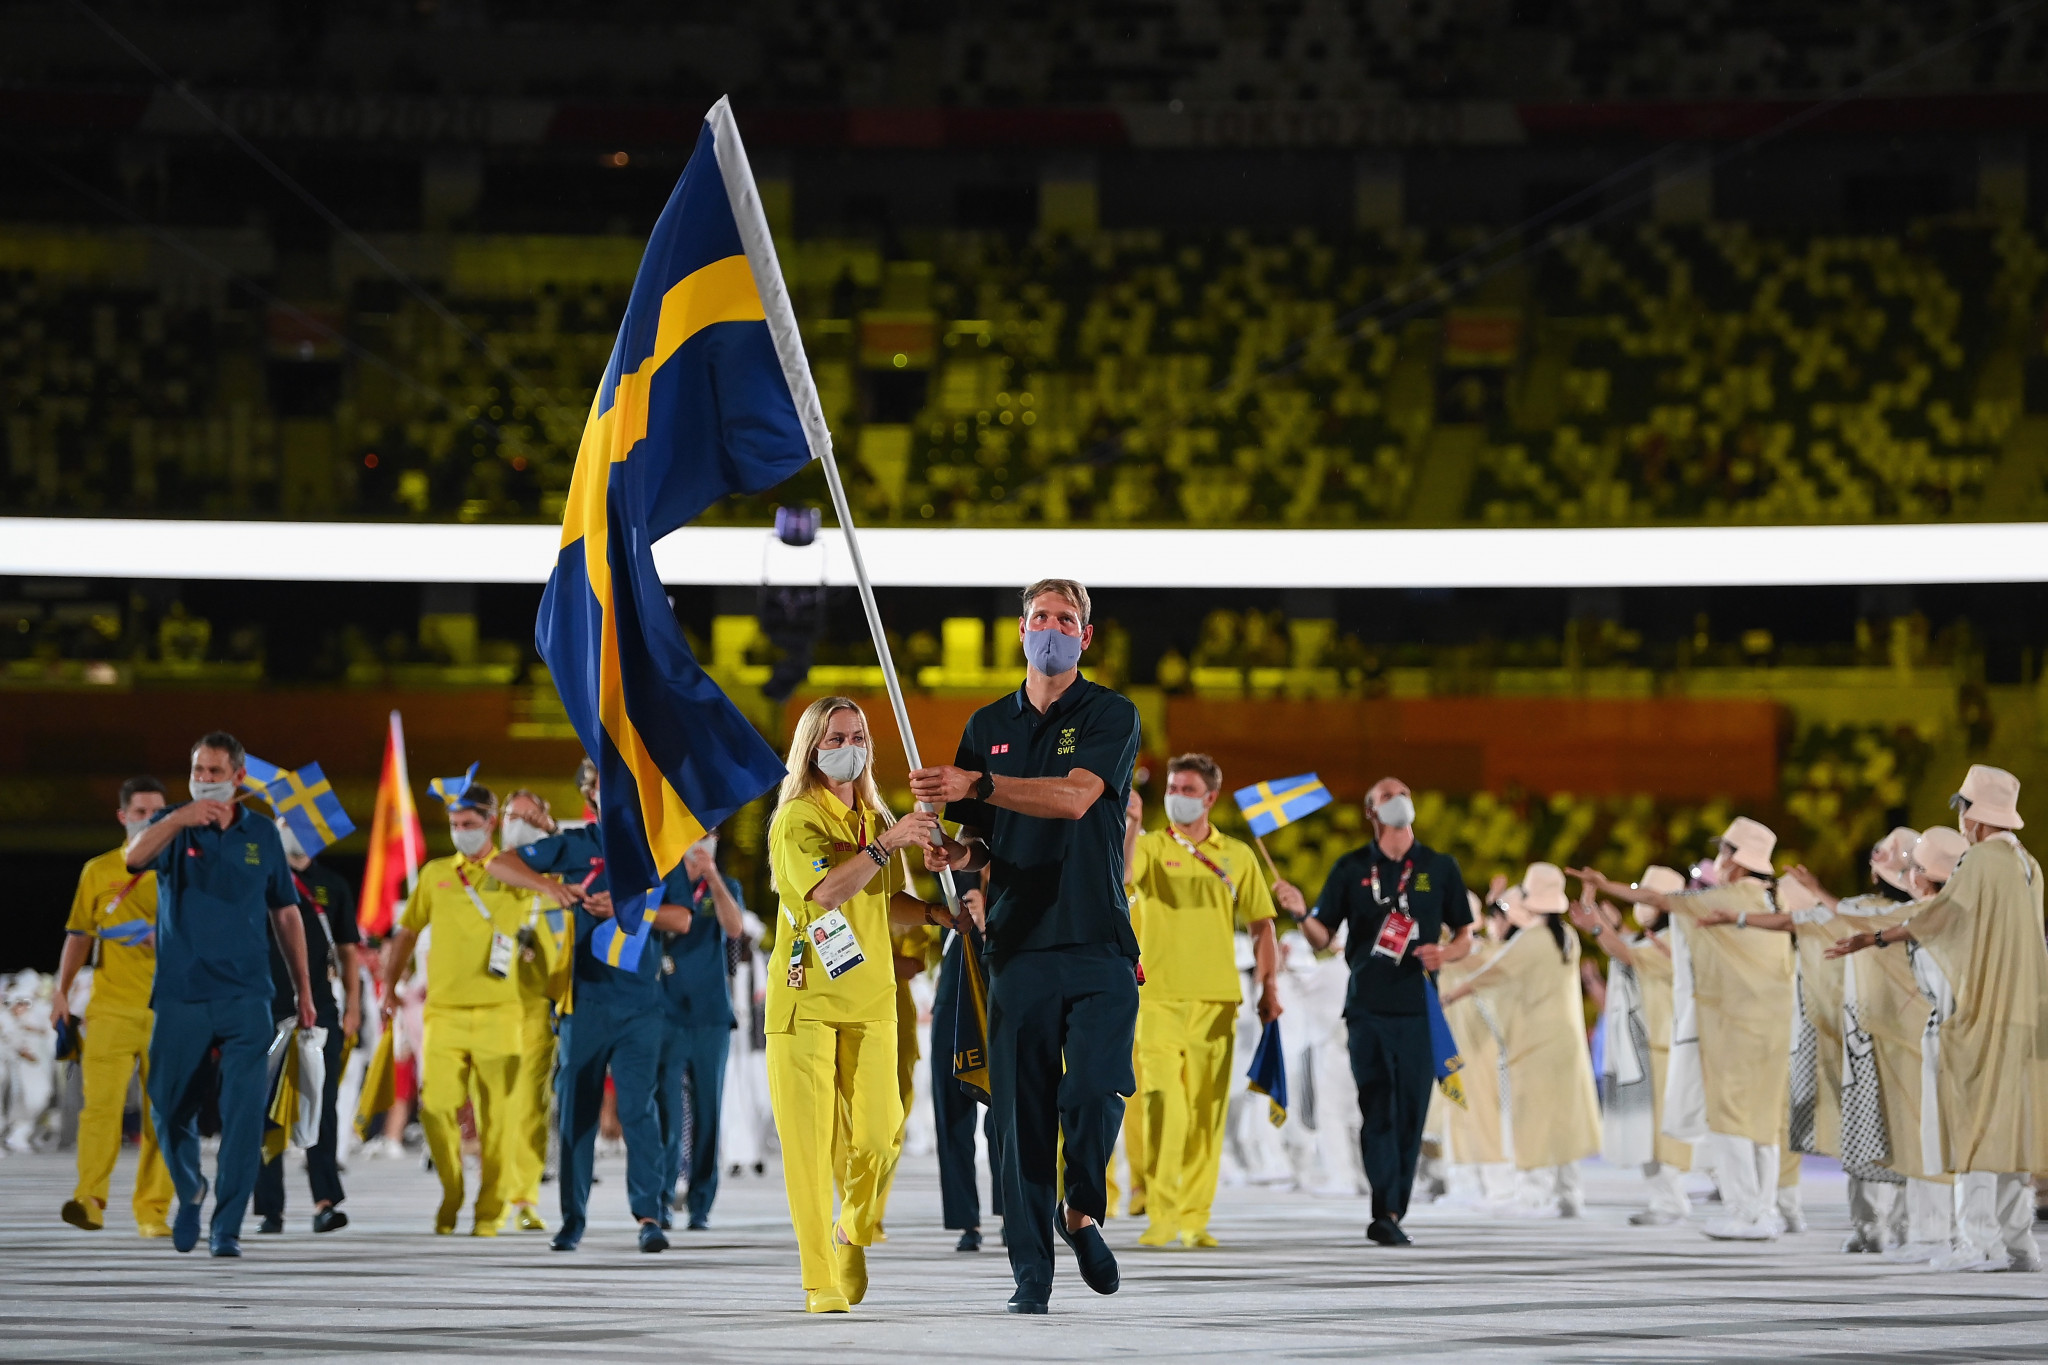 Swedish Olympic Committee seeking to appoint sports director